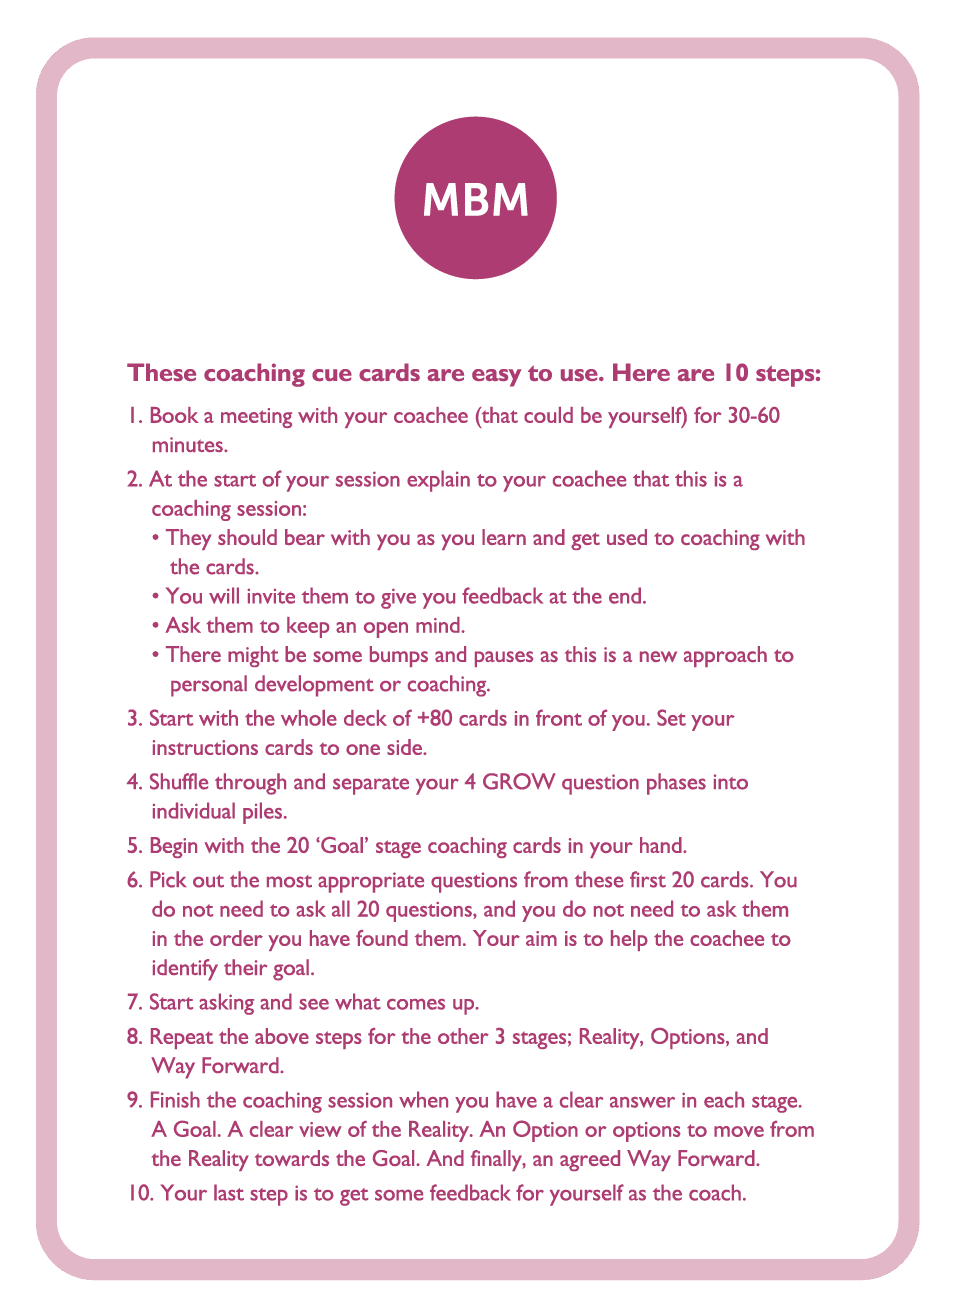 Coaching card with MBM logo titled 10 steps